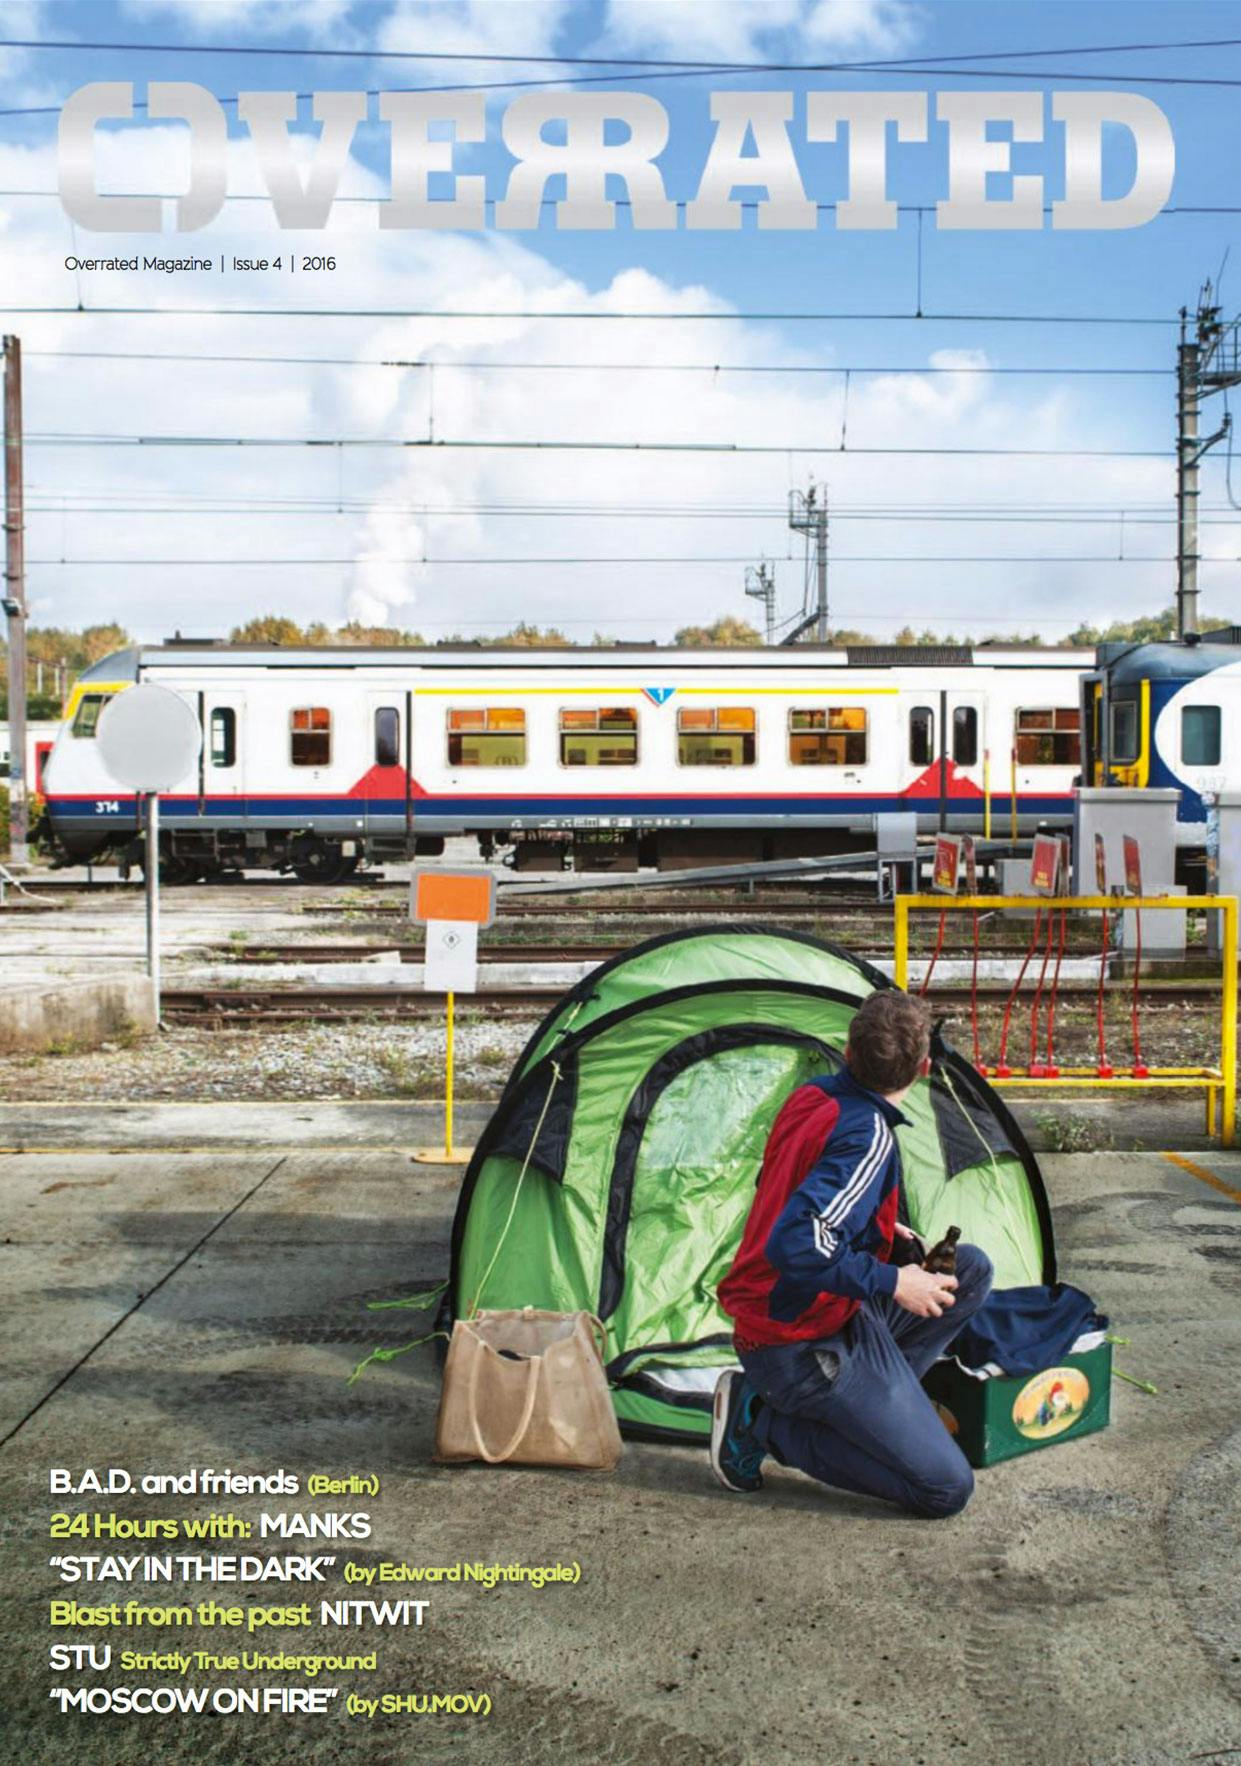 The cover of Overrated magazine issue #4 showing someone waking up from his tent on a Belgium train yard